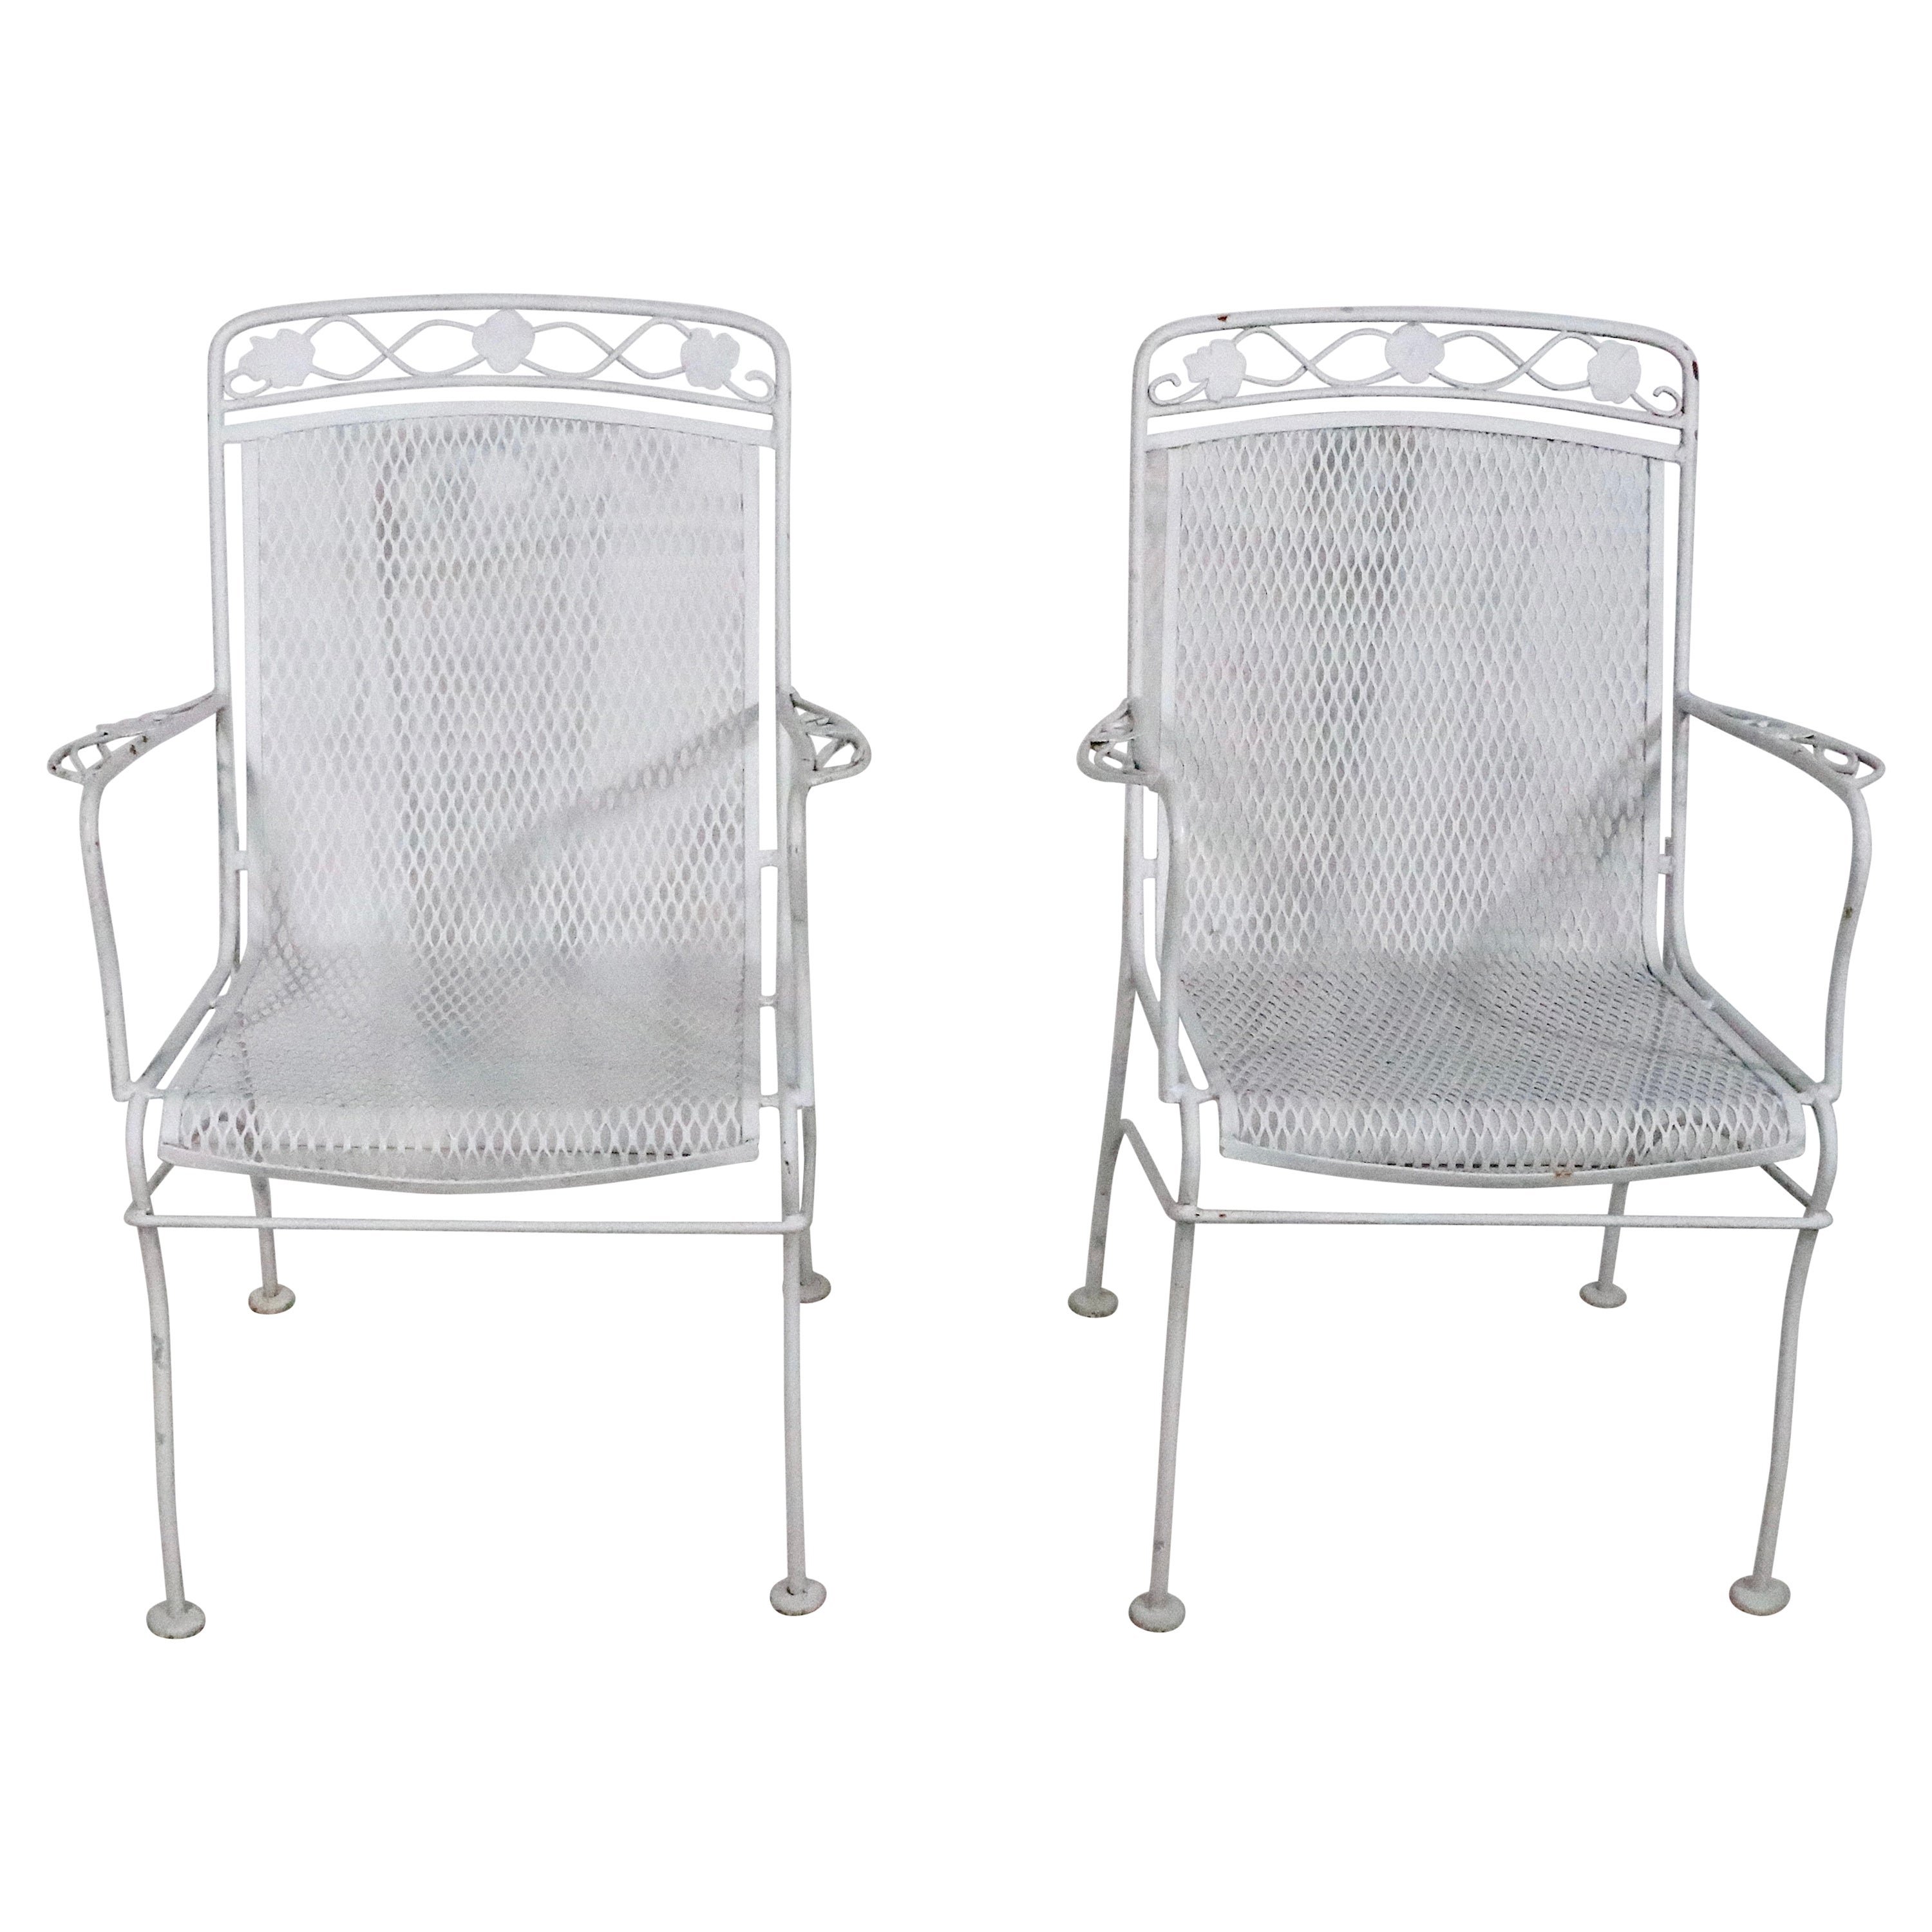 Pr. Wrought Iron Metal Mesh Garden Patio Poolside Chairs by Woodard c. 1950/70's For Sale